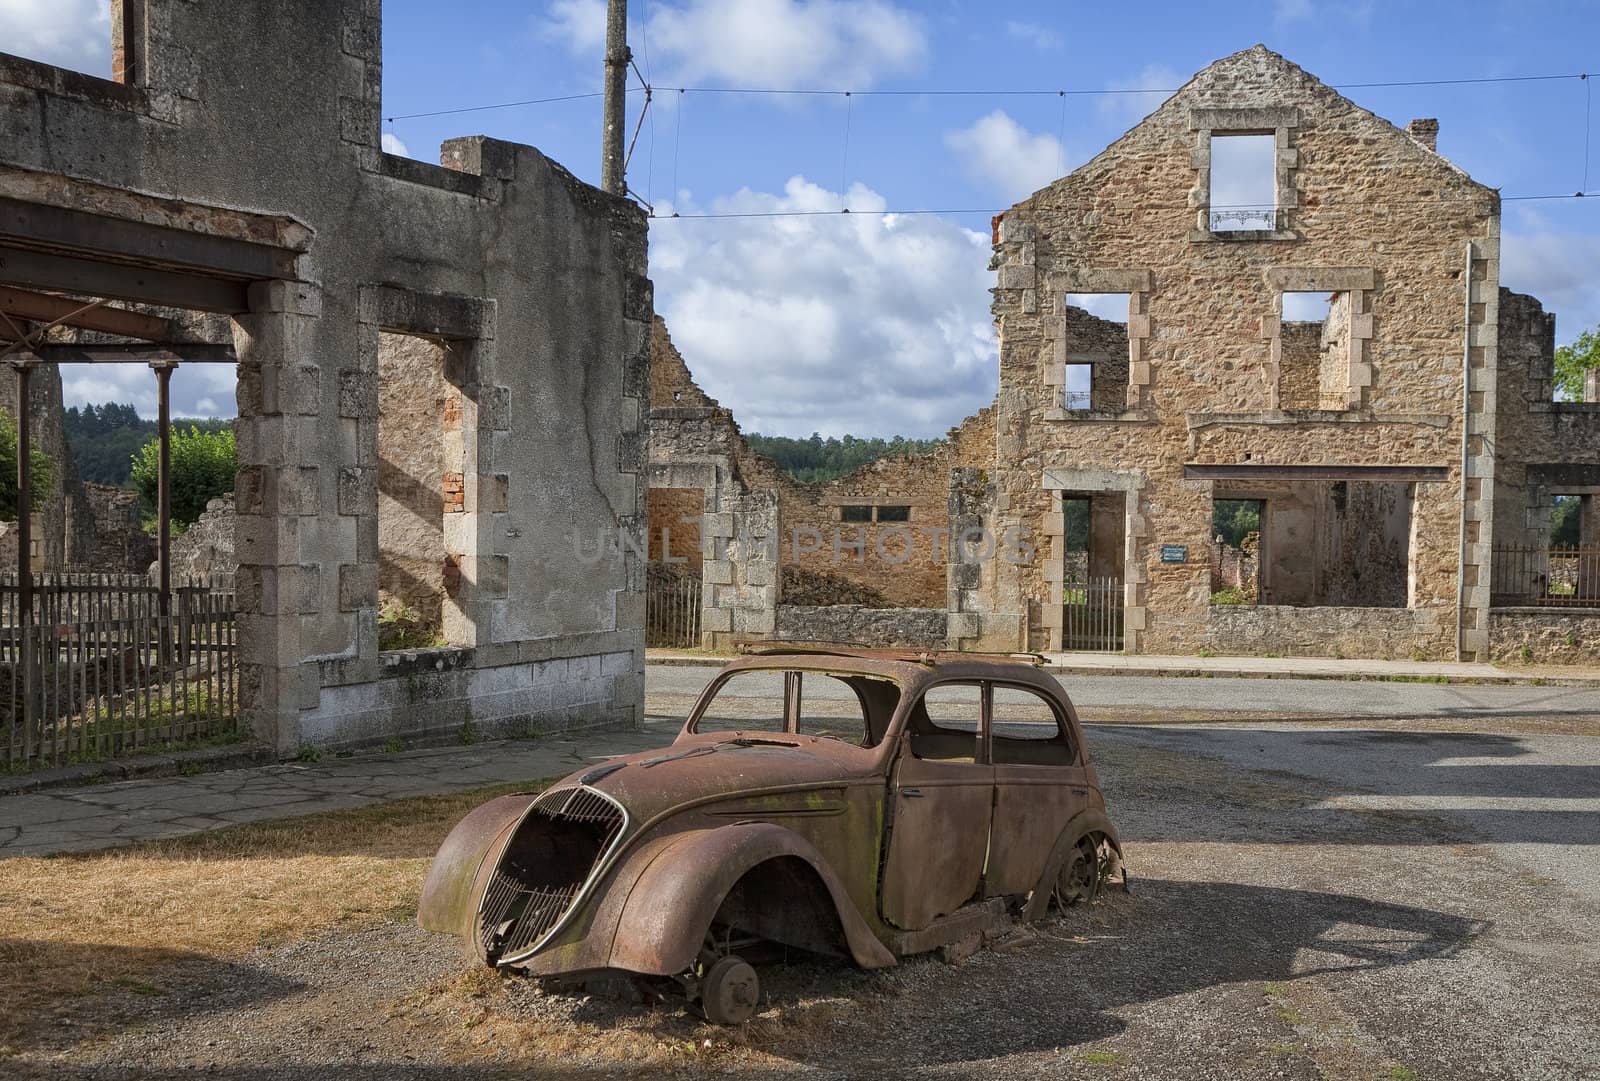 On June 10th 1944  642 inhabitants of Oradour-sur-Glane in the southern France was killed by the German Gestapo and the village burned down. Burned out cars and buildings still tell the story.